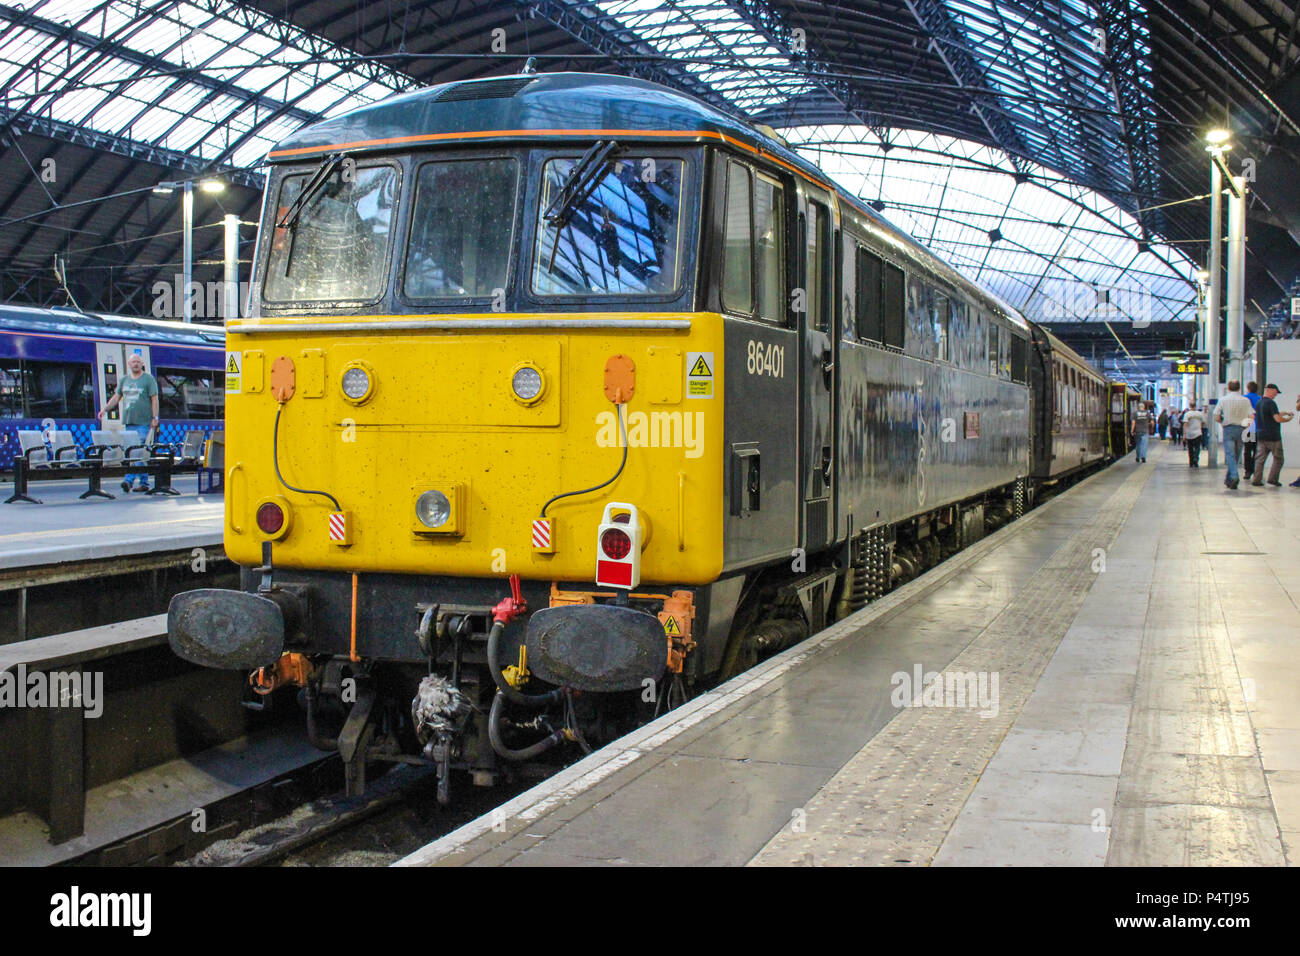 Class 86 Electric Locomotive at Glasgow Queen Street Railway Station Stock Photo